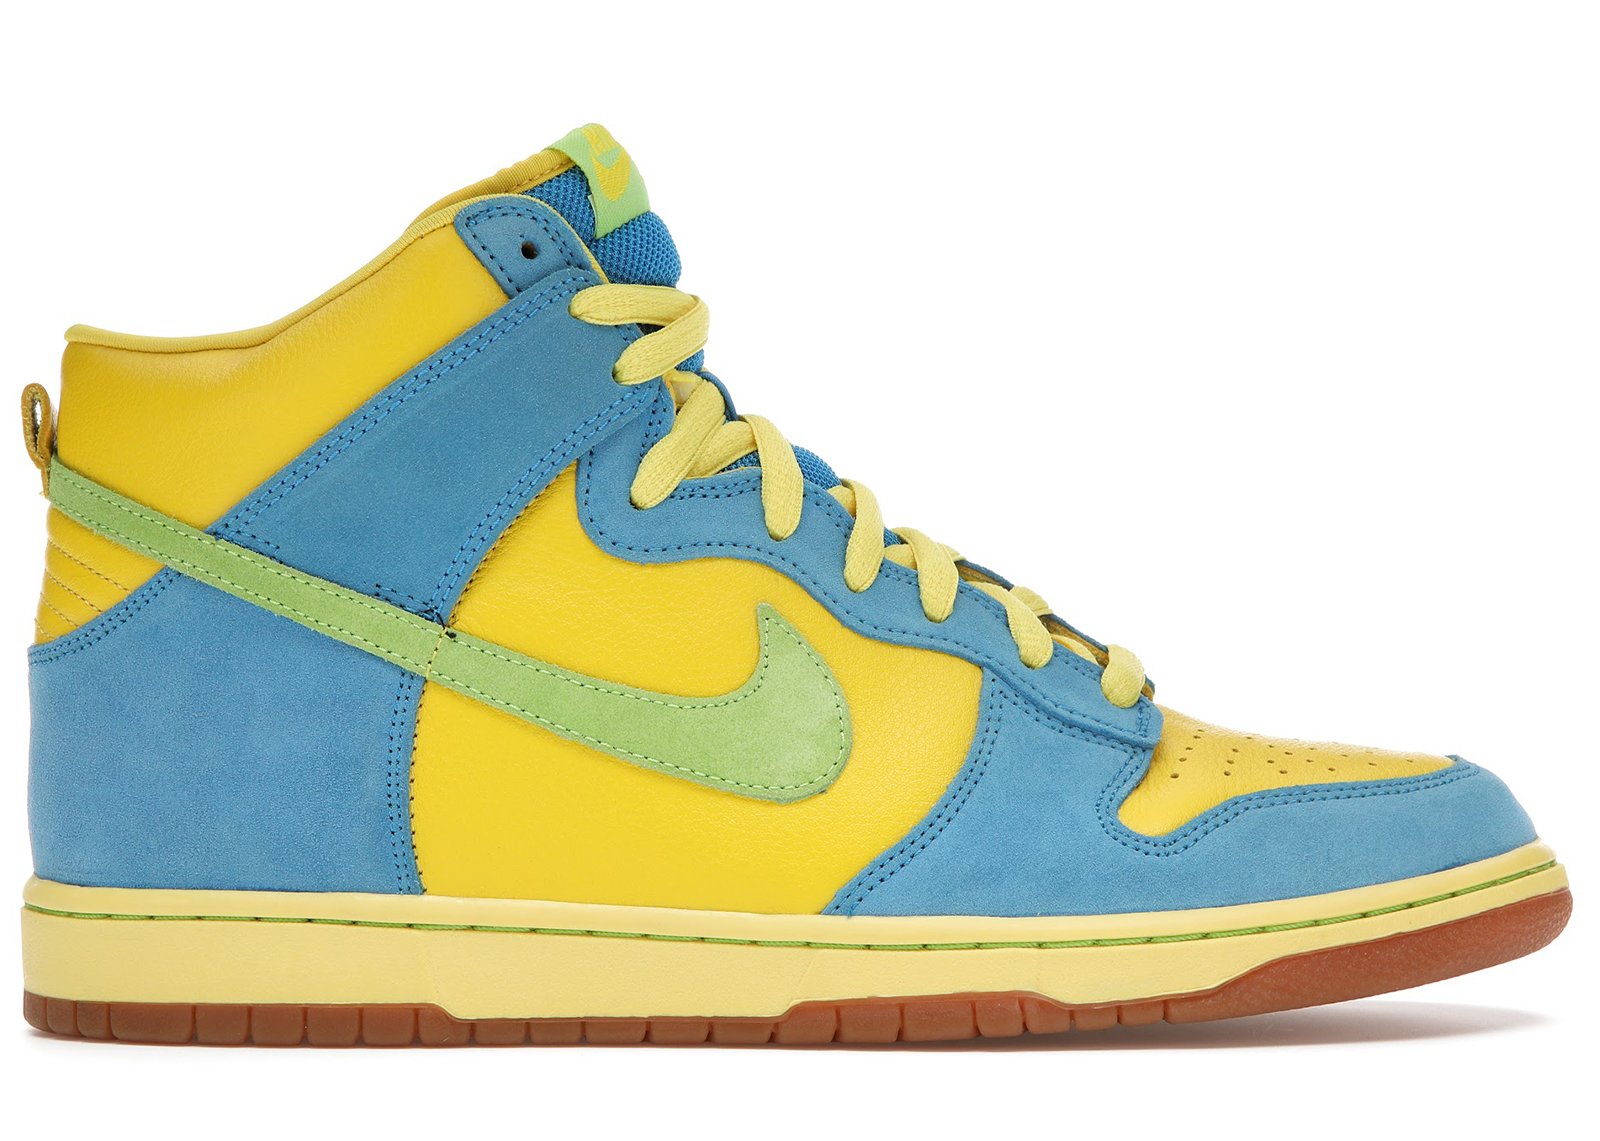 Nike SB Dunk High Marge Simpson sneakers